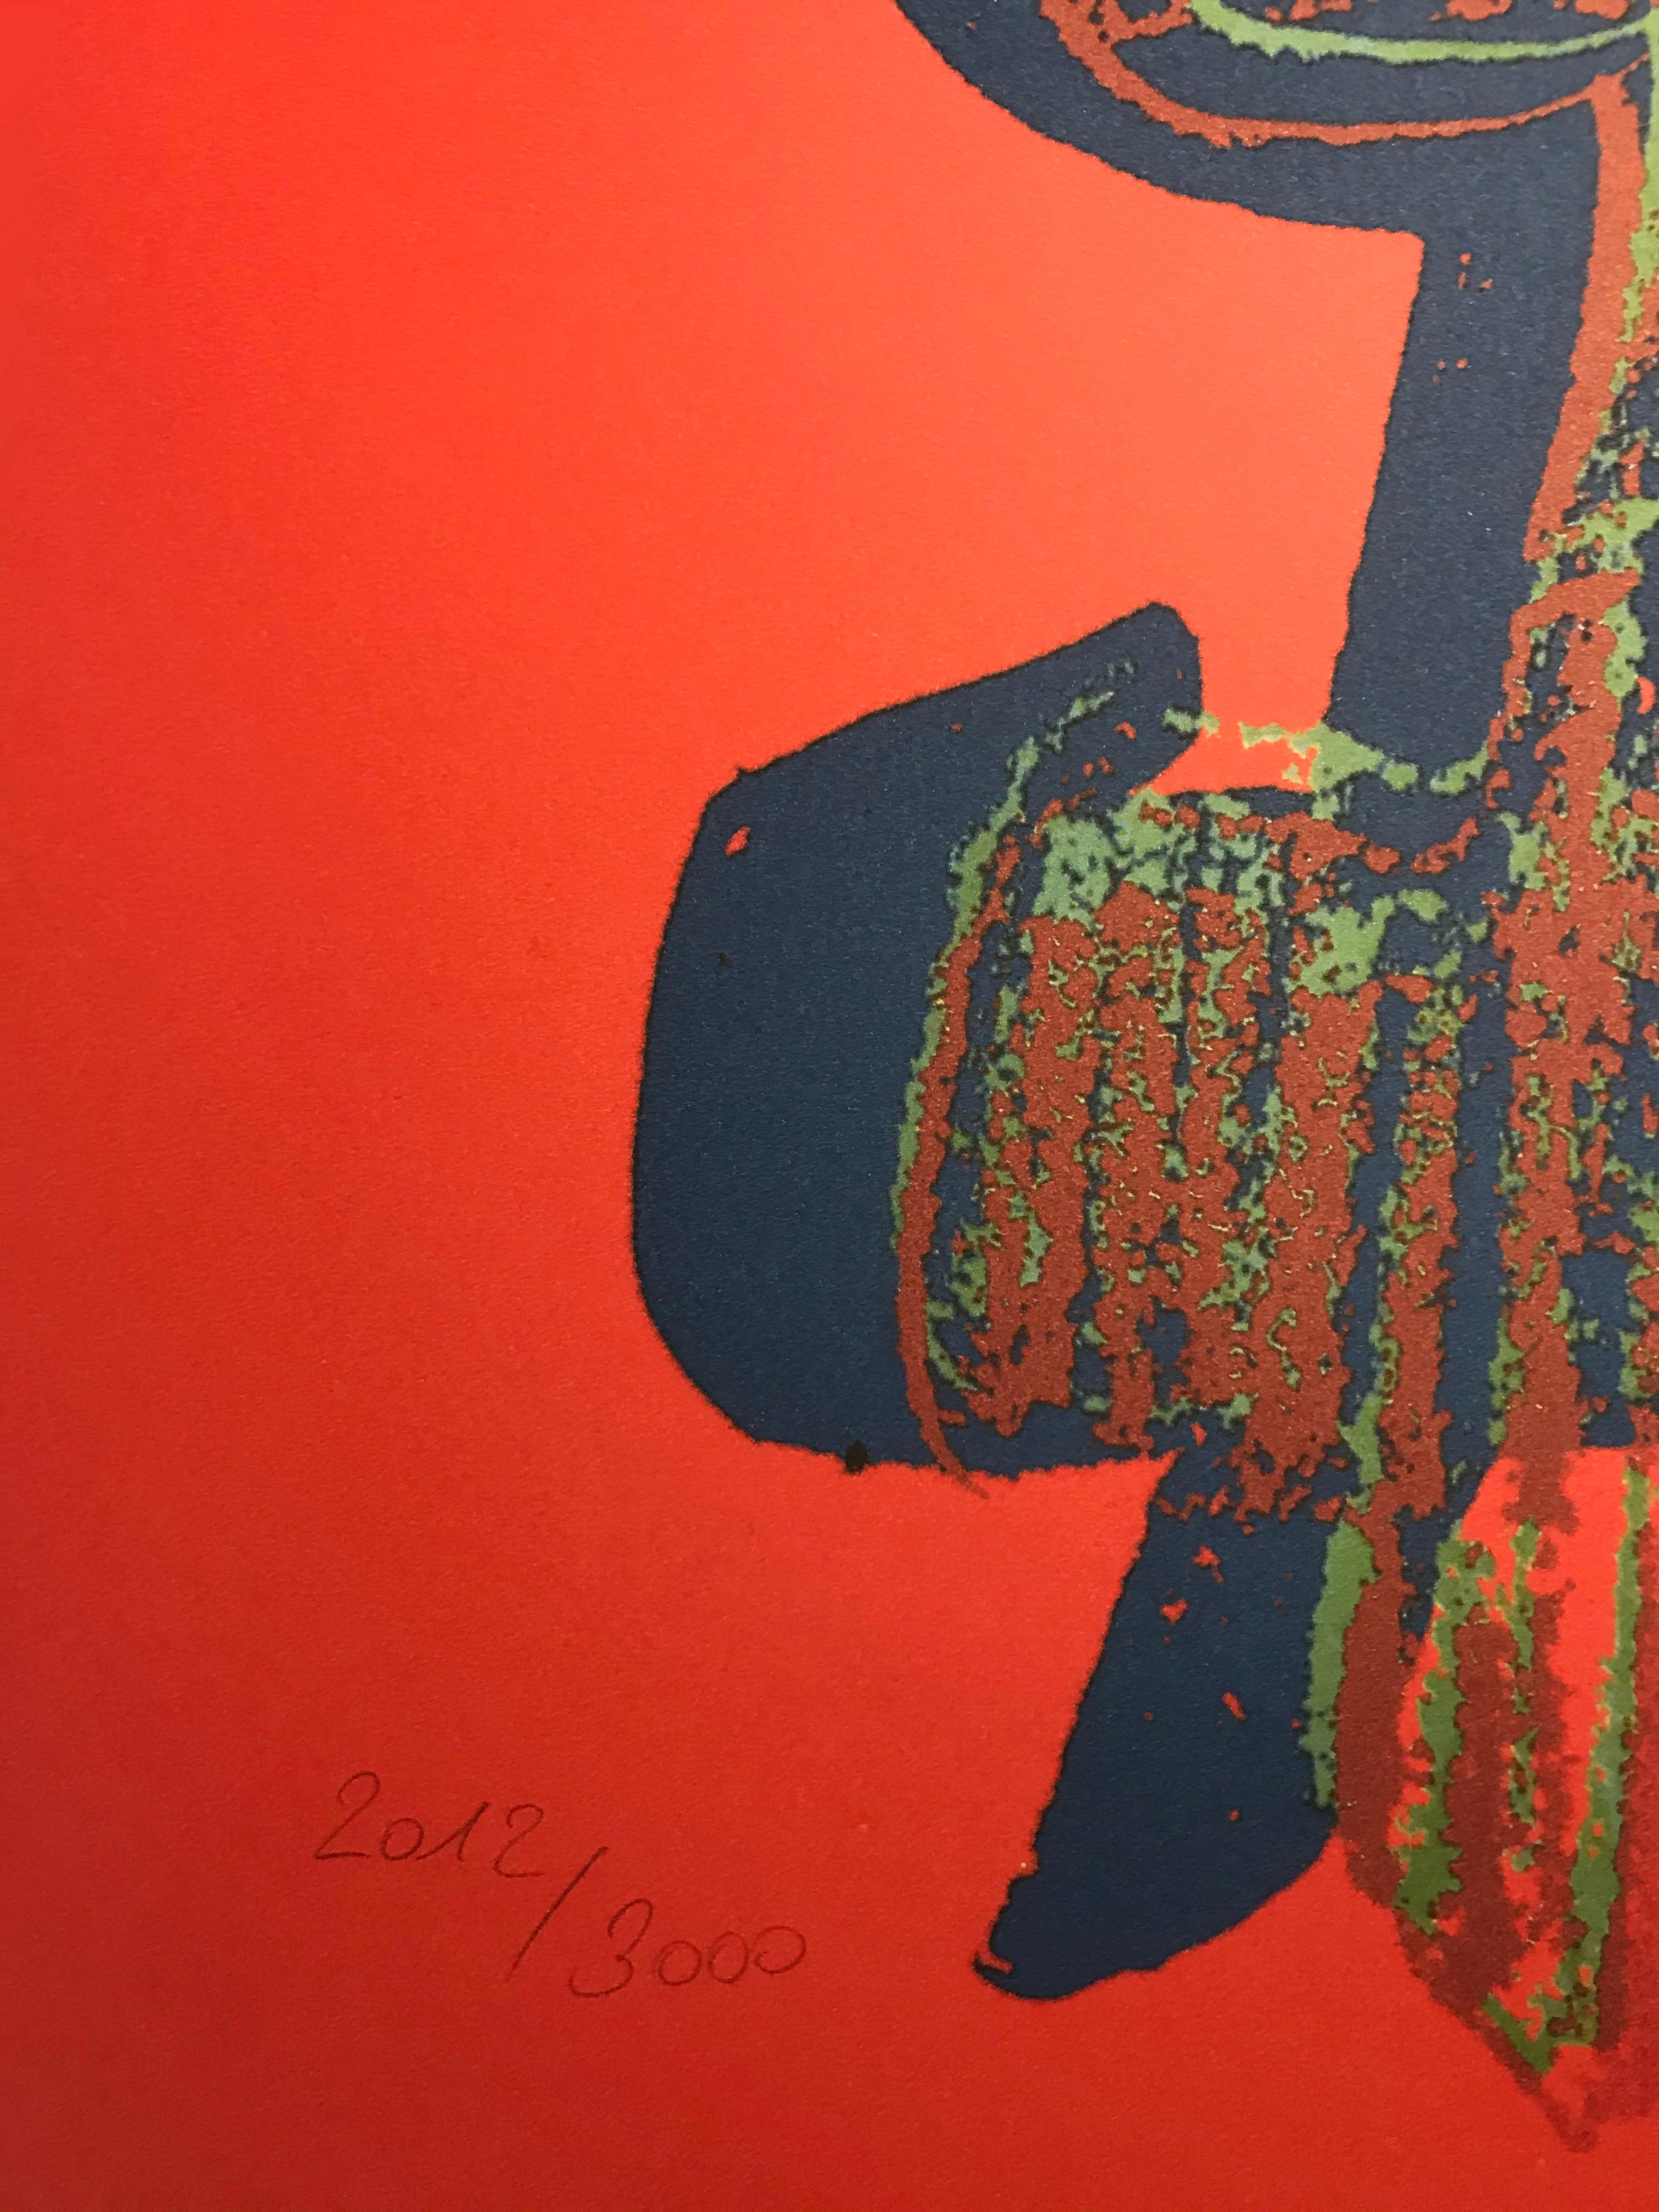 Granolithography Dollar sign in red Andy warhol 1986 1